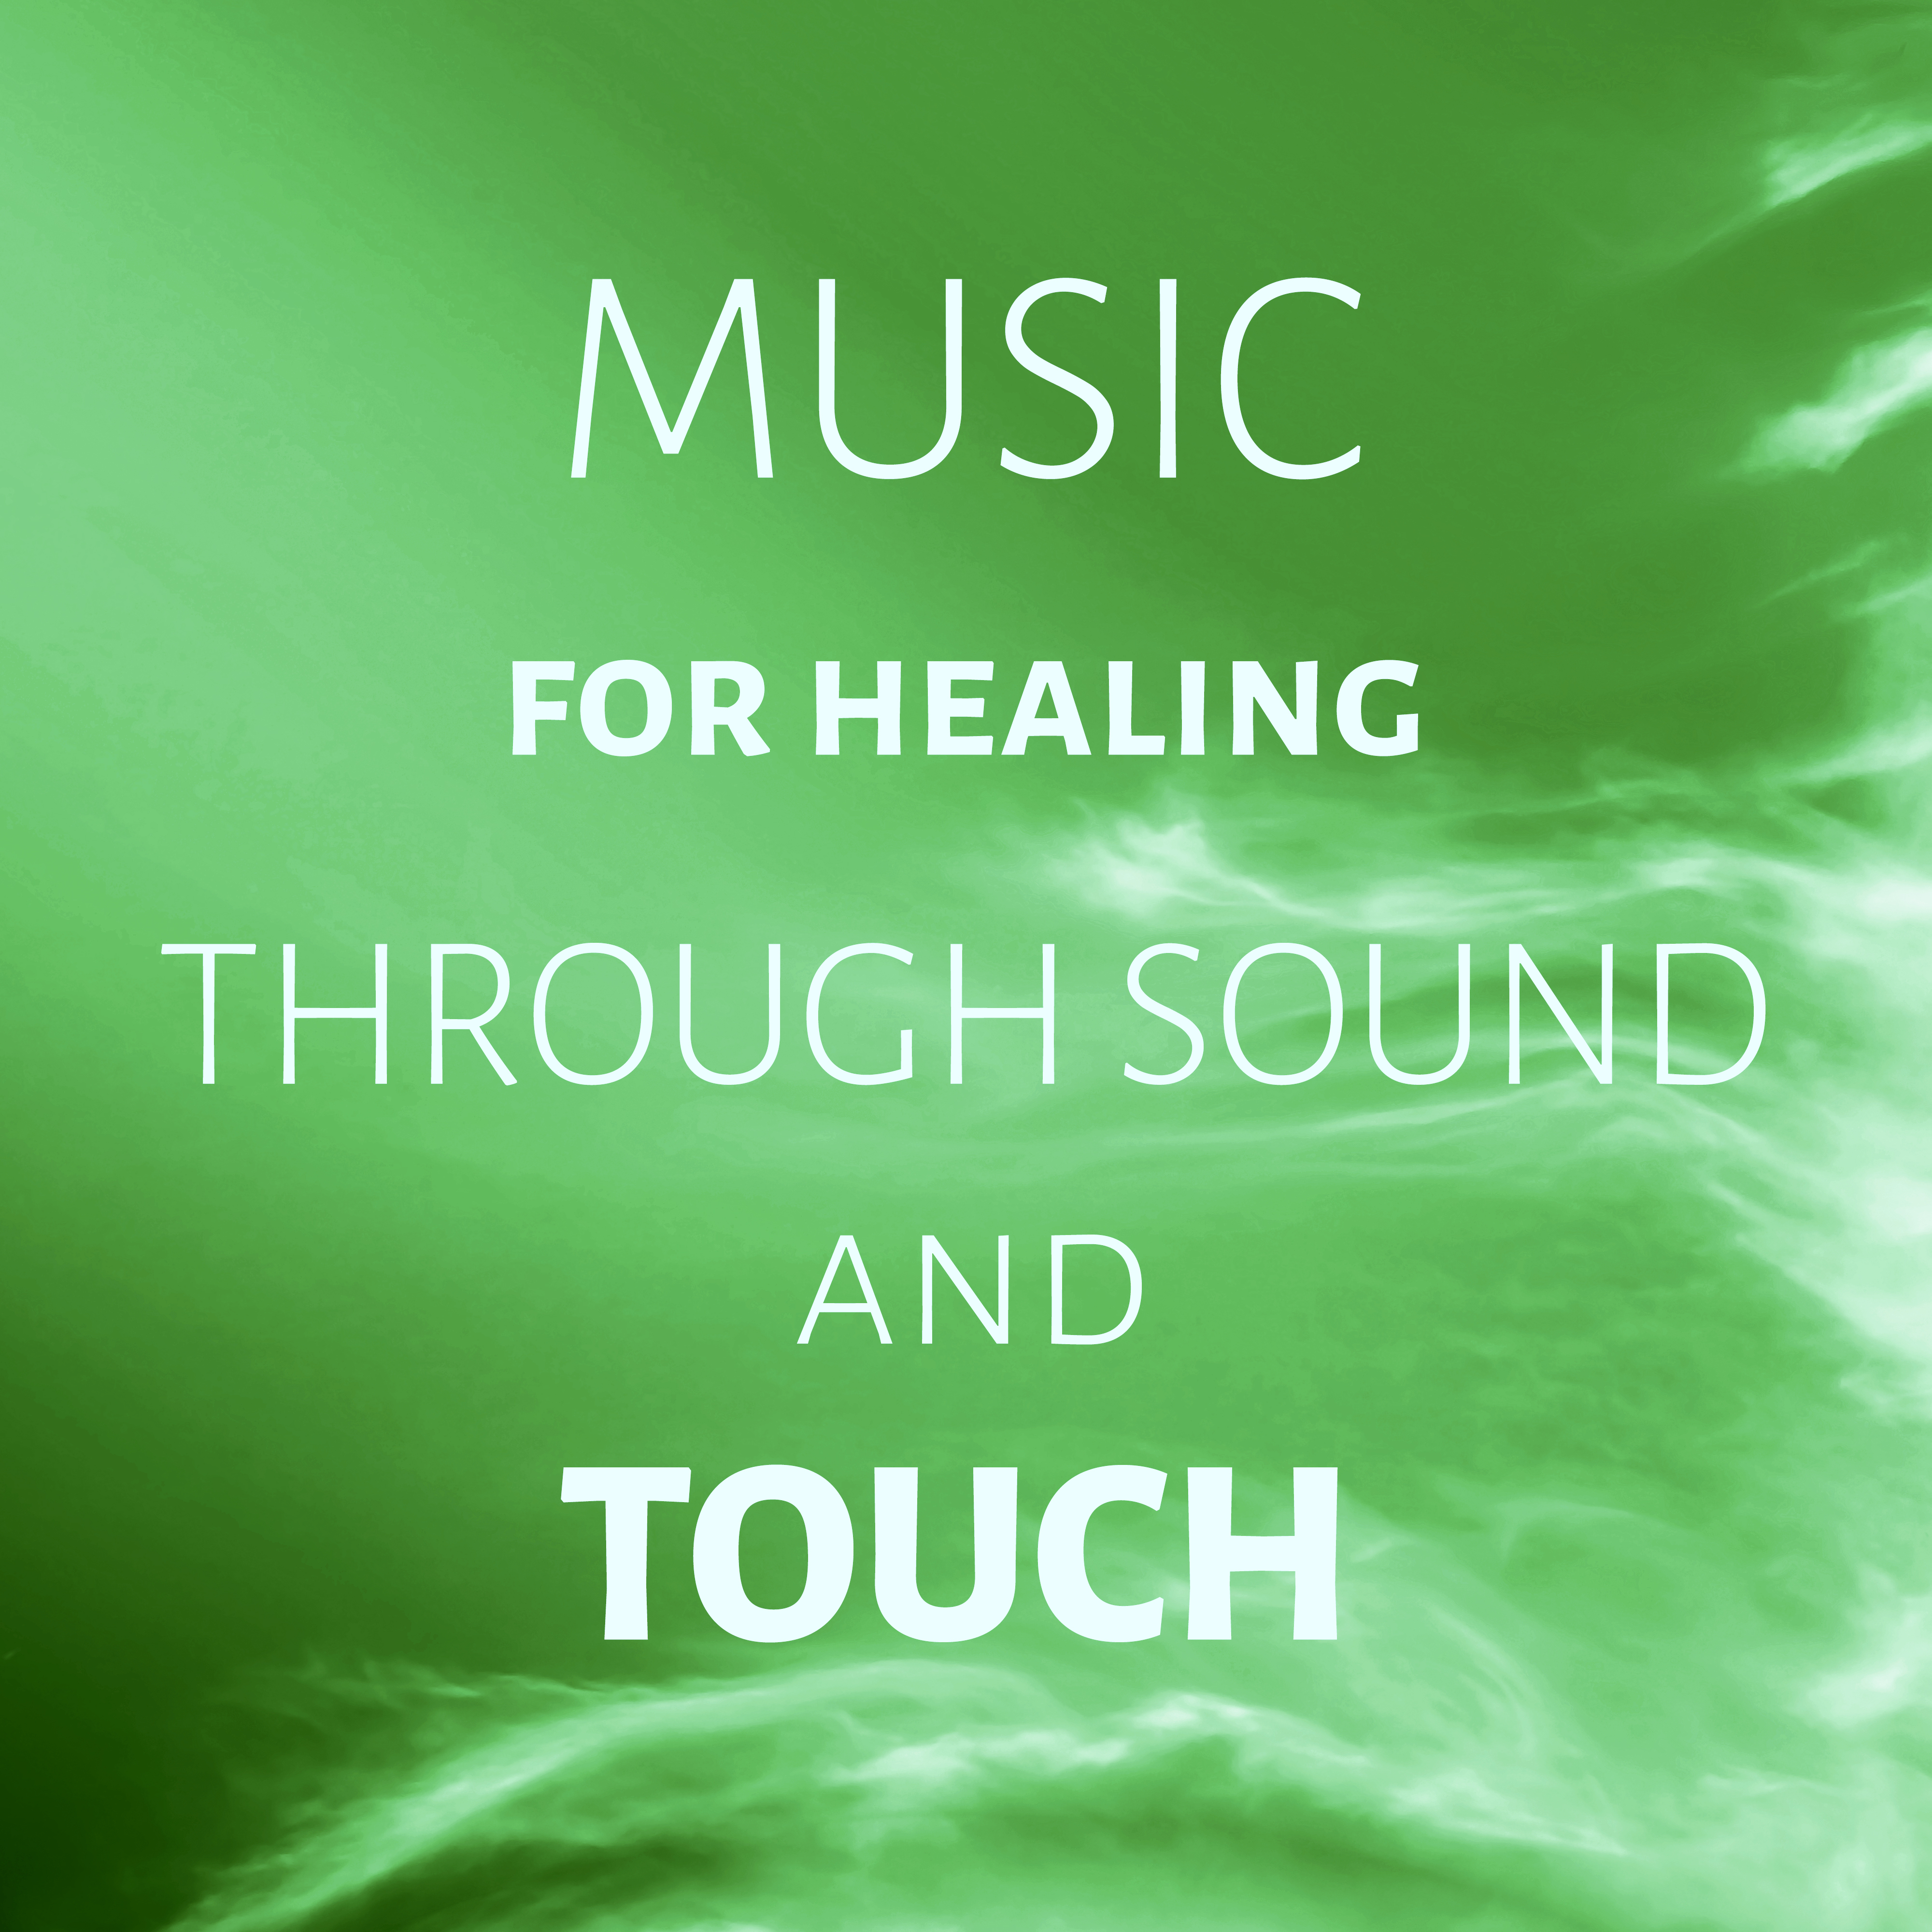 Music for Healing Through Sound and Touch - Mindfulness Meditation, Time to Spa Music Background for Wellness, Soothing Sounds with Ocean Waves, Massage Therapy, Waterfalls